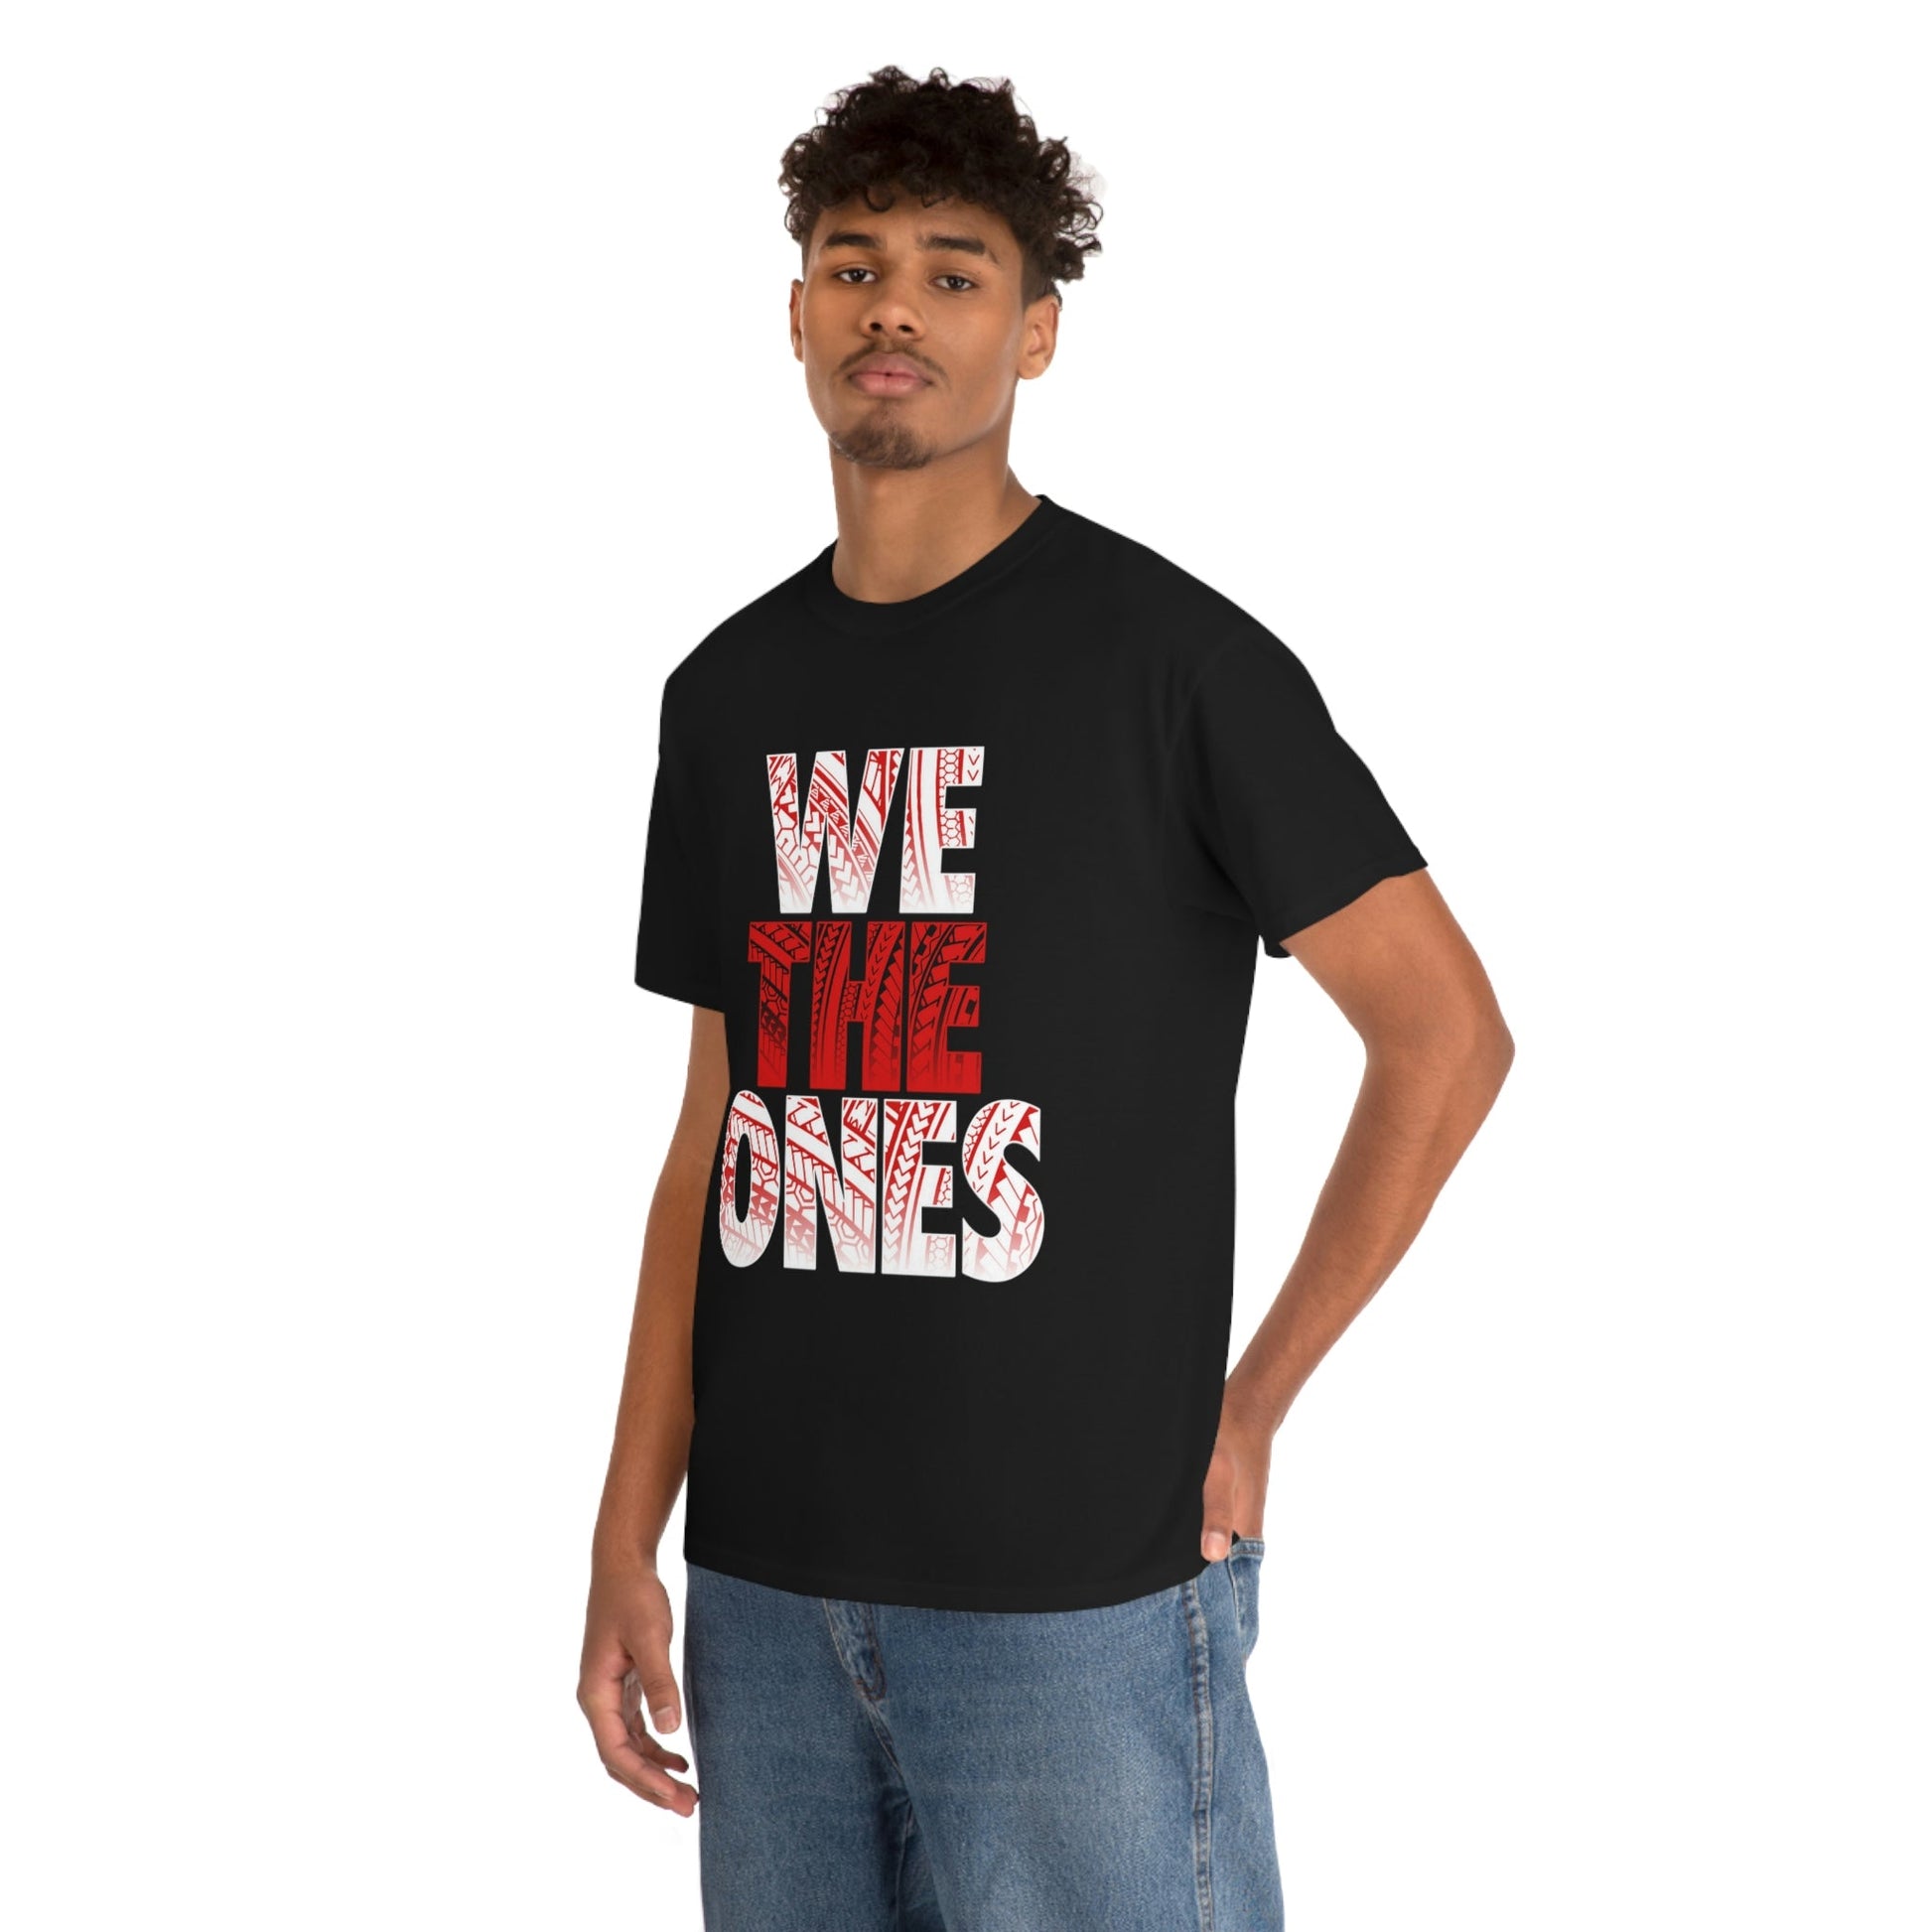 The Bloodline We The Ones Tribal T-Shirt - Black - RetroTeeShop